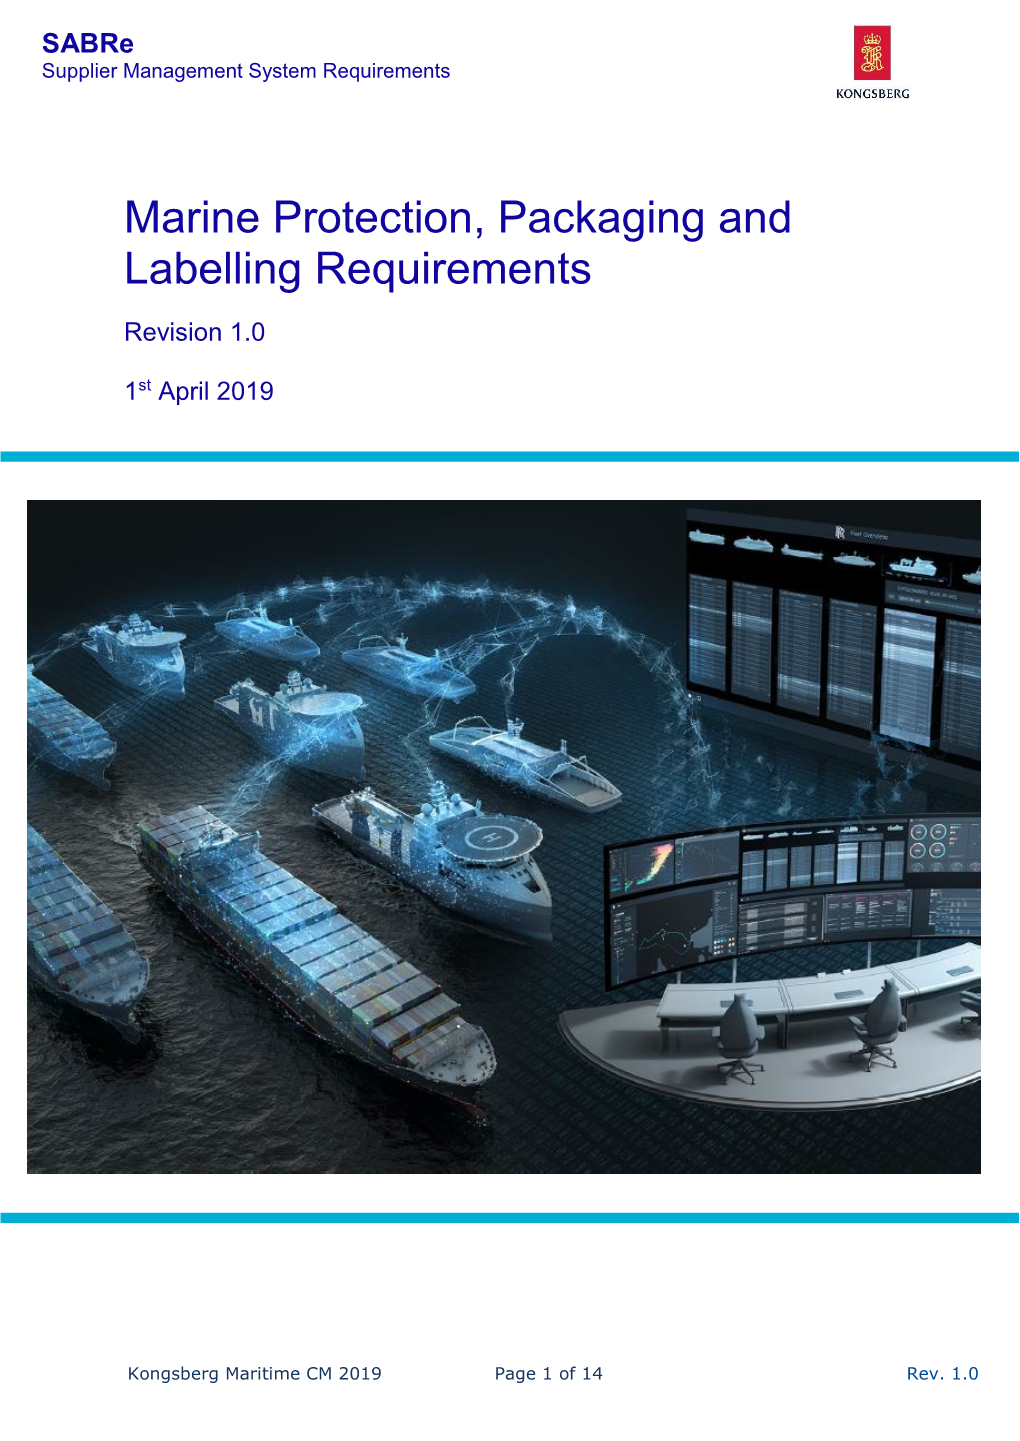 Marine Protection, Packaging and Labelling Requirements